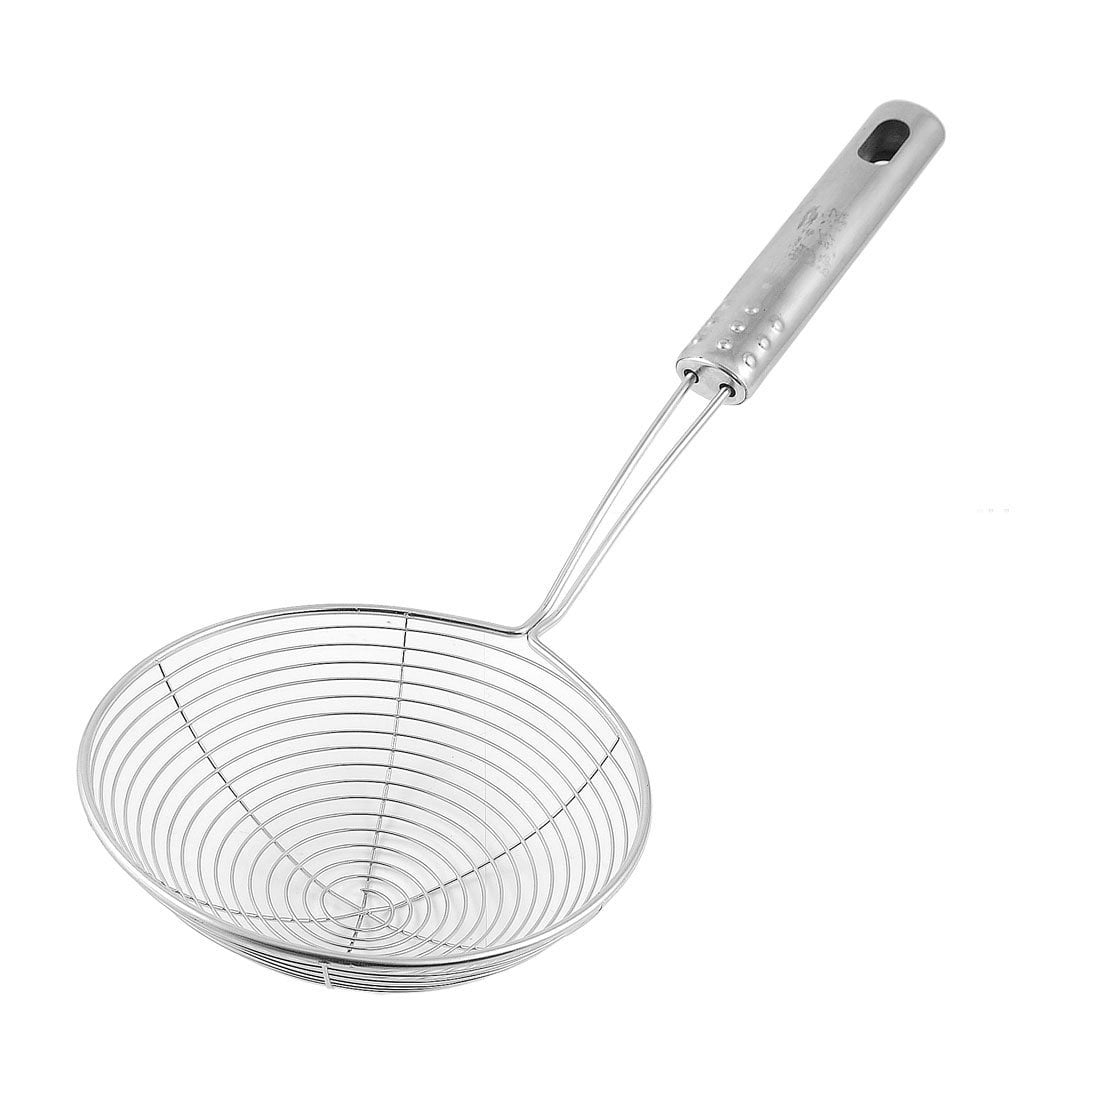 Fat Skimmer Spoon Stainless Steel Fine Mesh Sift Strainer with Handle